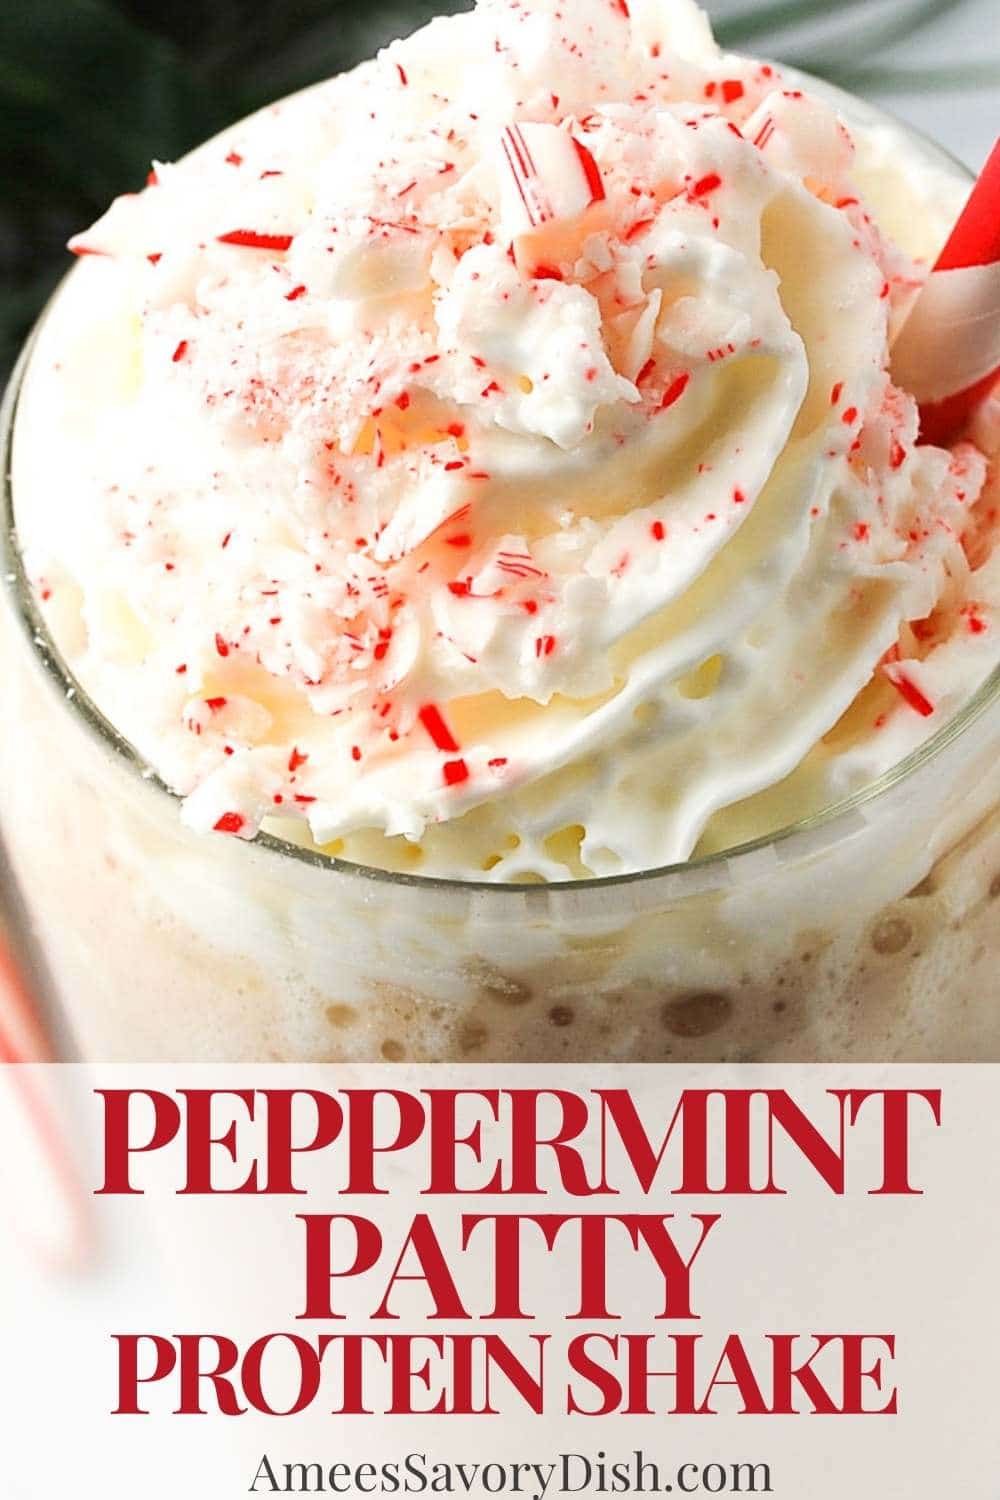 This Peppermint Patty Protein Shake is festive and delicious! It's the perfect way to celebrate the season while staying on track with your protein goals. via @Ameessavorydish